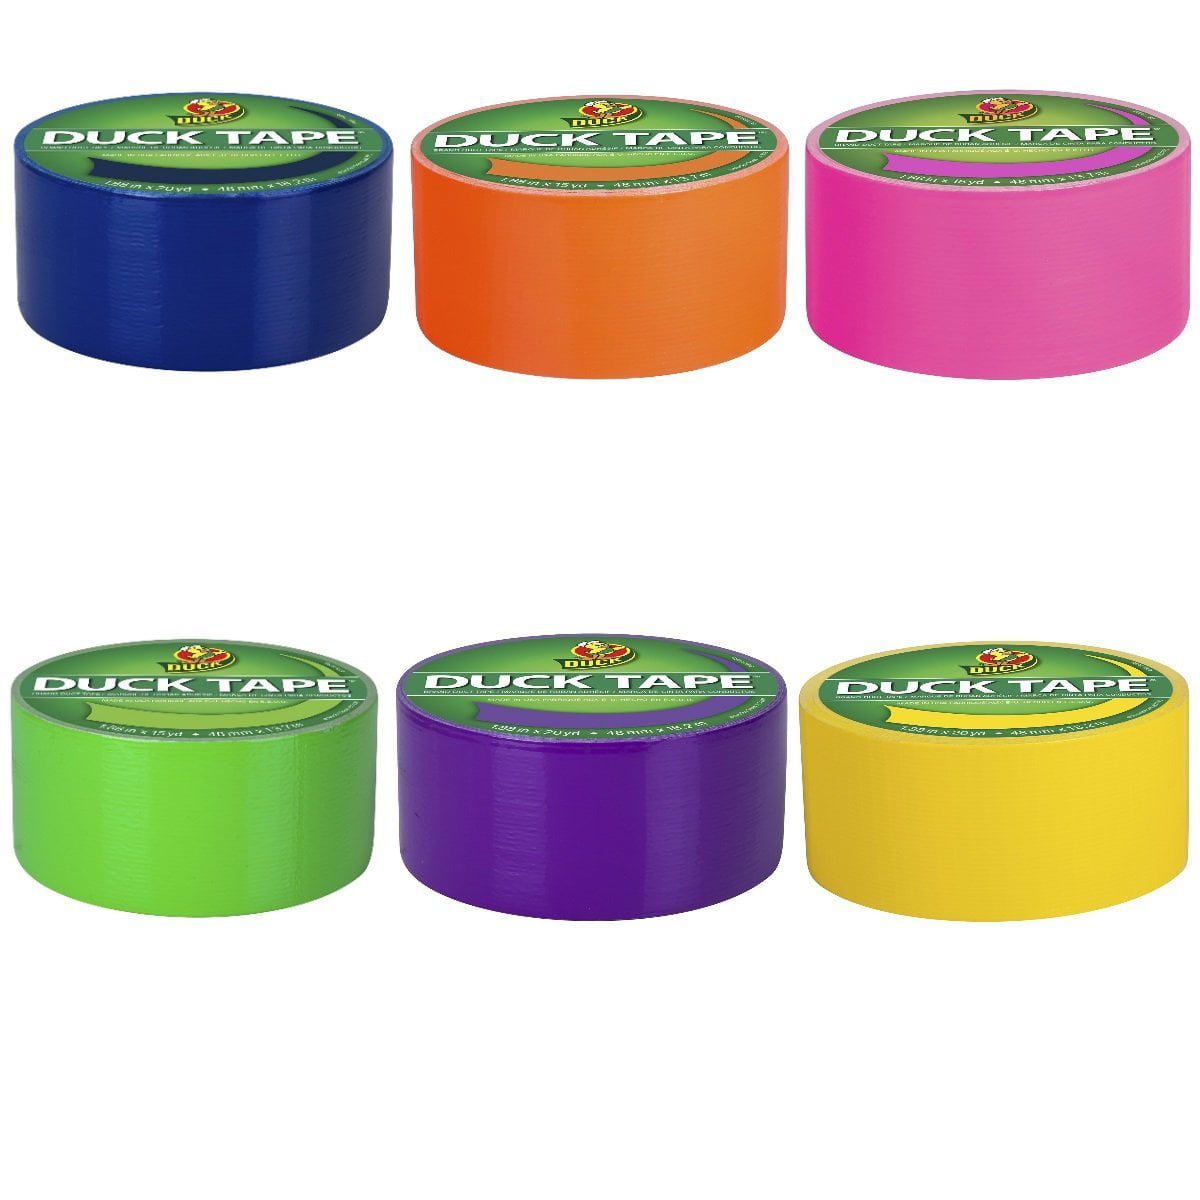 Giftexpress 6 Assorted Colored Duct Tapes - Multi Purposes Bright Colors  Tapes Great for DIY Art Home School Office Assorted Colors 2 Roll by 10 yds